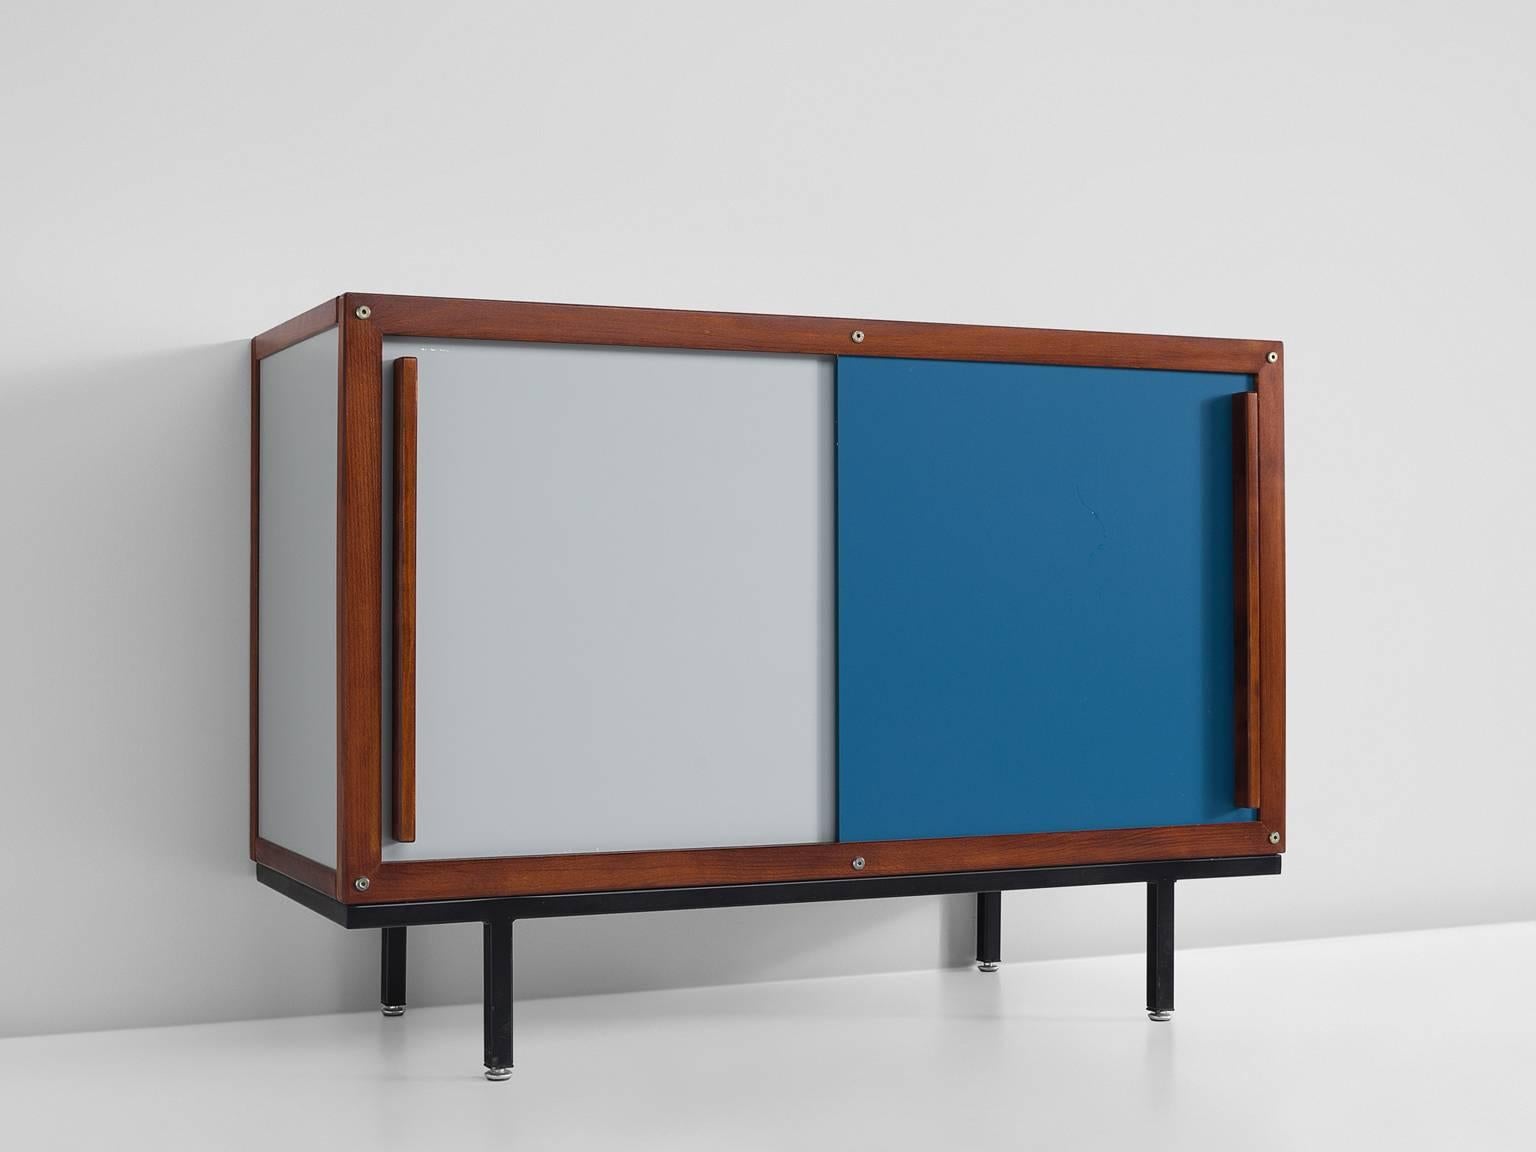 Cabinet, oak in grey and blue by Andre Sornay, France, 1960s.

This sideboard is designed and made by the French cabinetmaker Andre Sornay. The sideboard is executed in blue and grey sliding doors that are framed by solid oak. This cabinet is solid